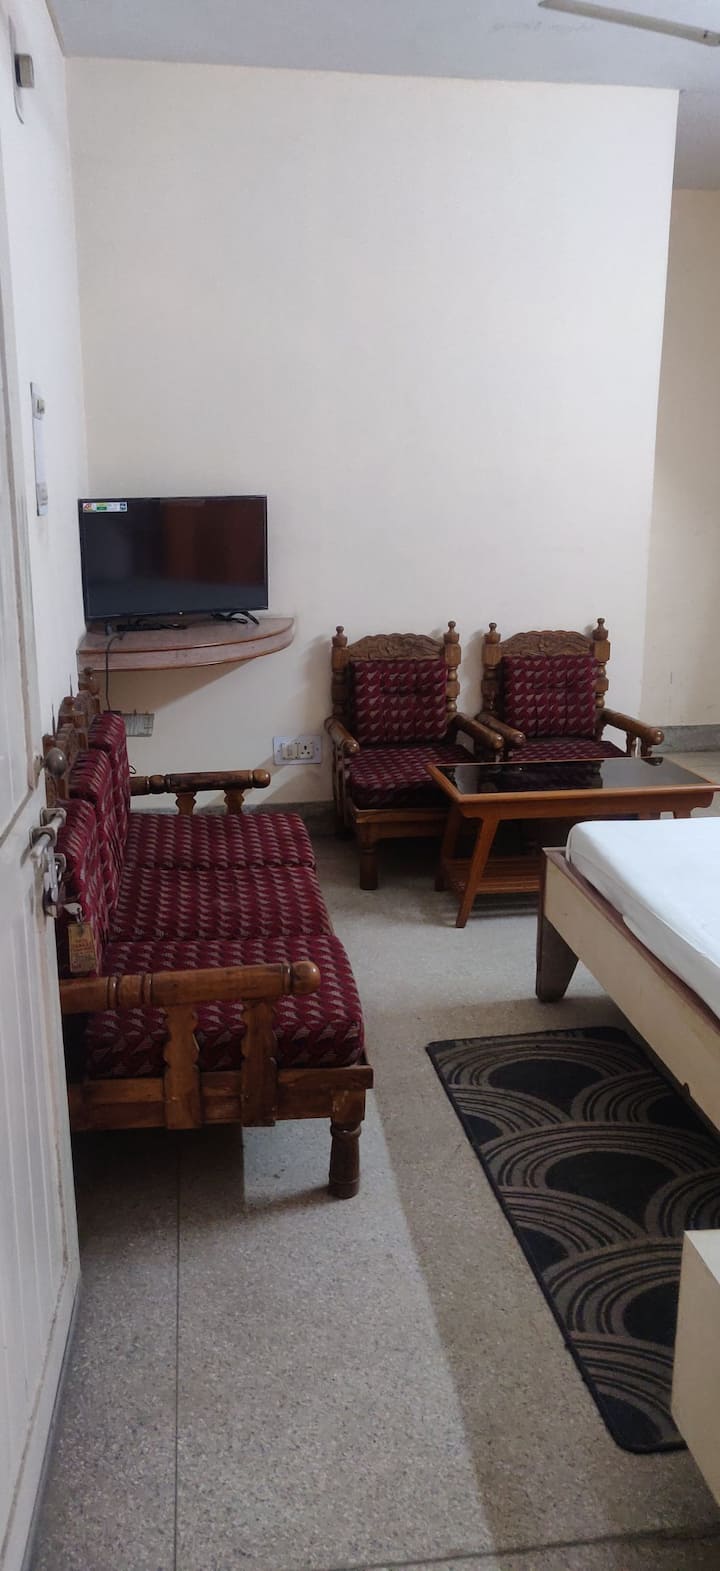 Homely Stay In A Hotel Room Near Railway Station - 加雅